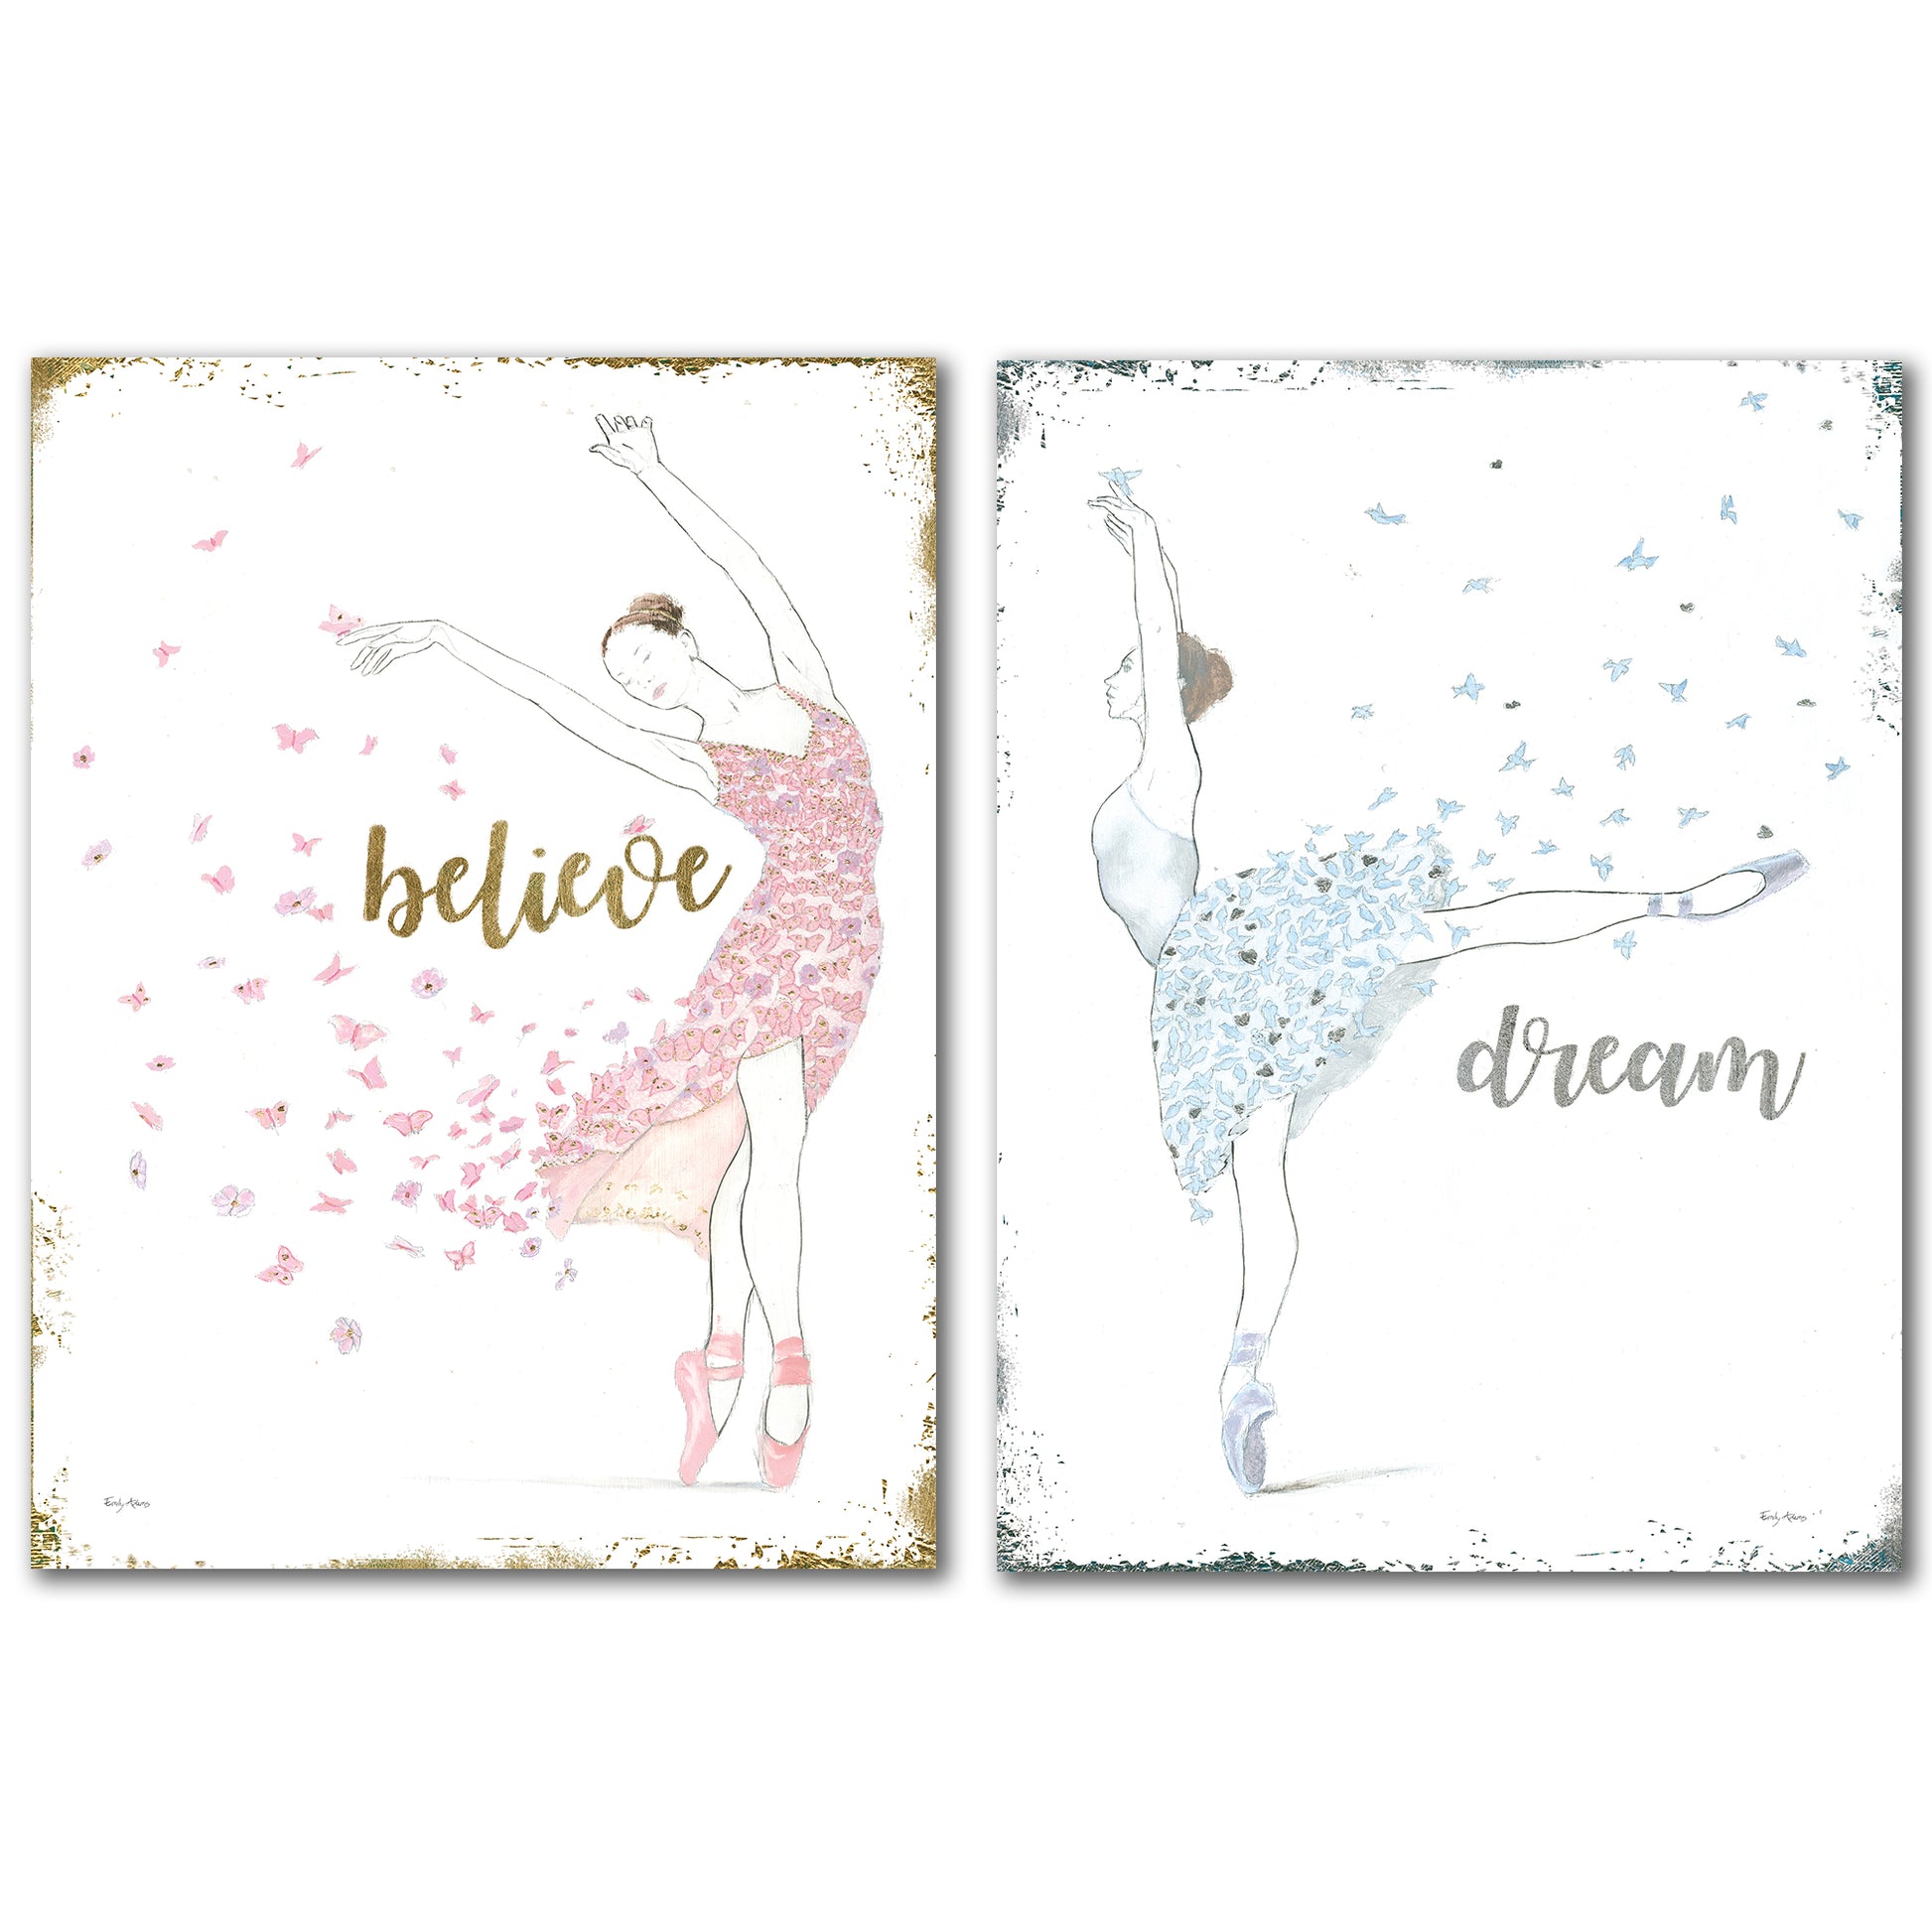 Dream Dancer by Wild Apple - 2 Piece Wrapped Canvas Set - Americanflat